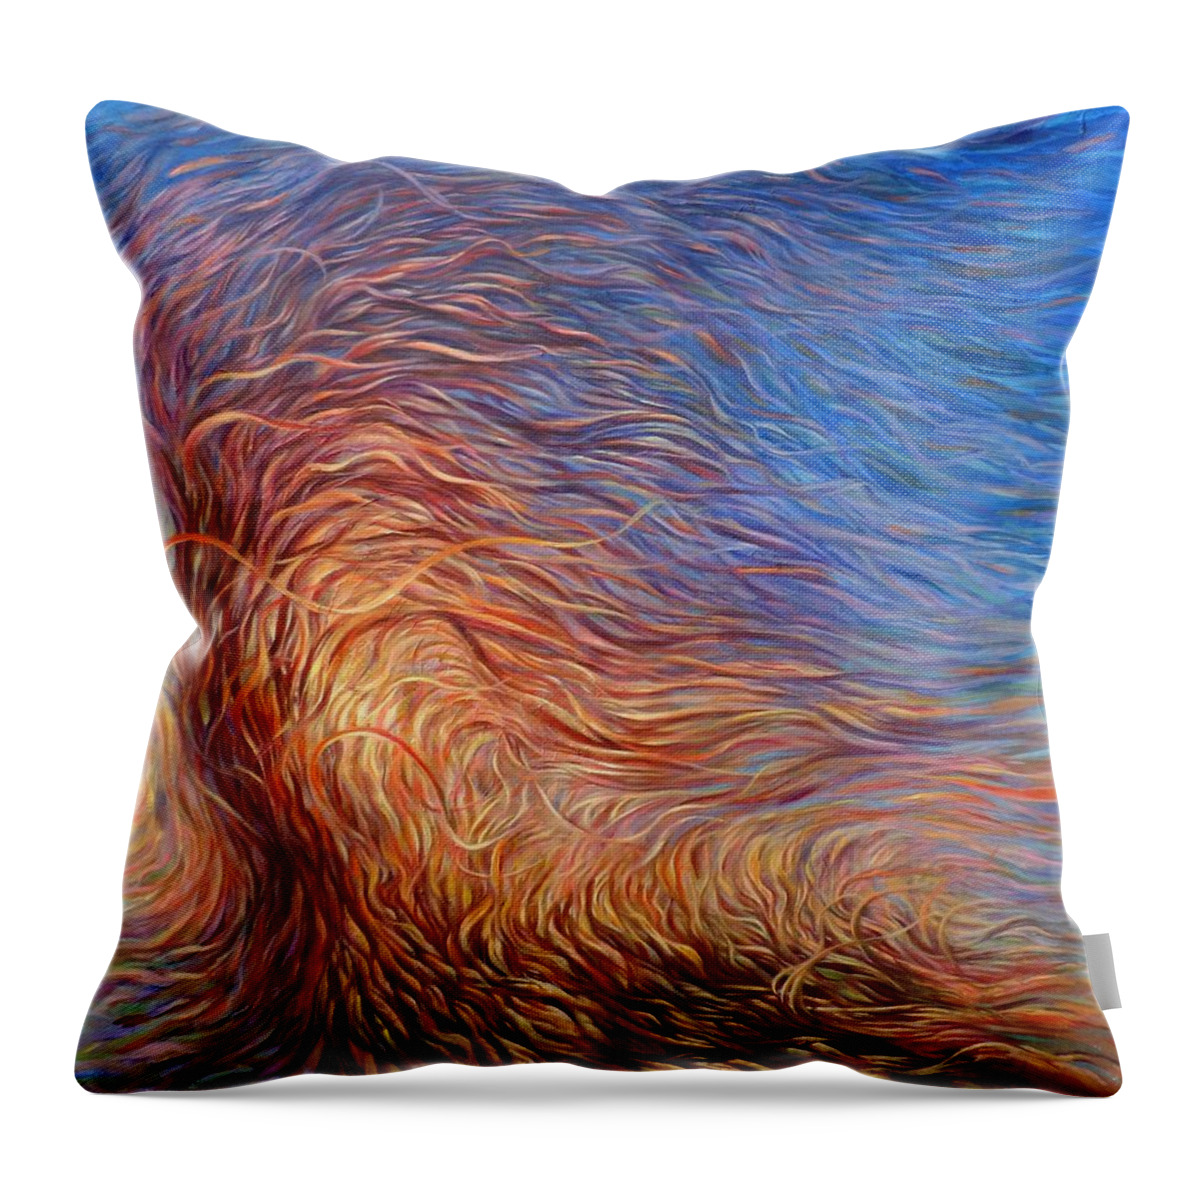 Whirl Tree Throw Pillow featuring the painting Whirl Tree by Hans Droog